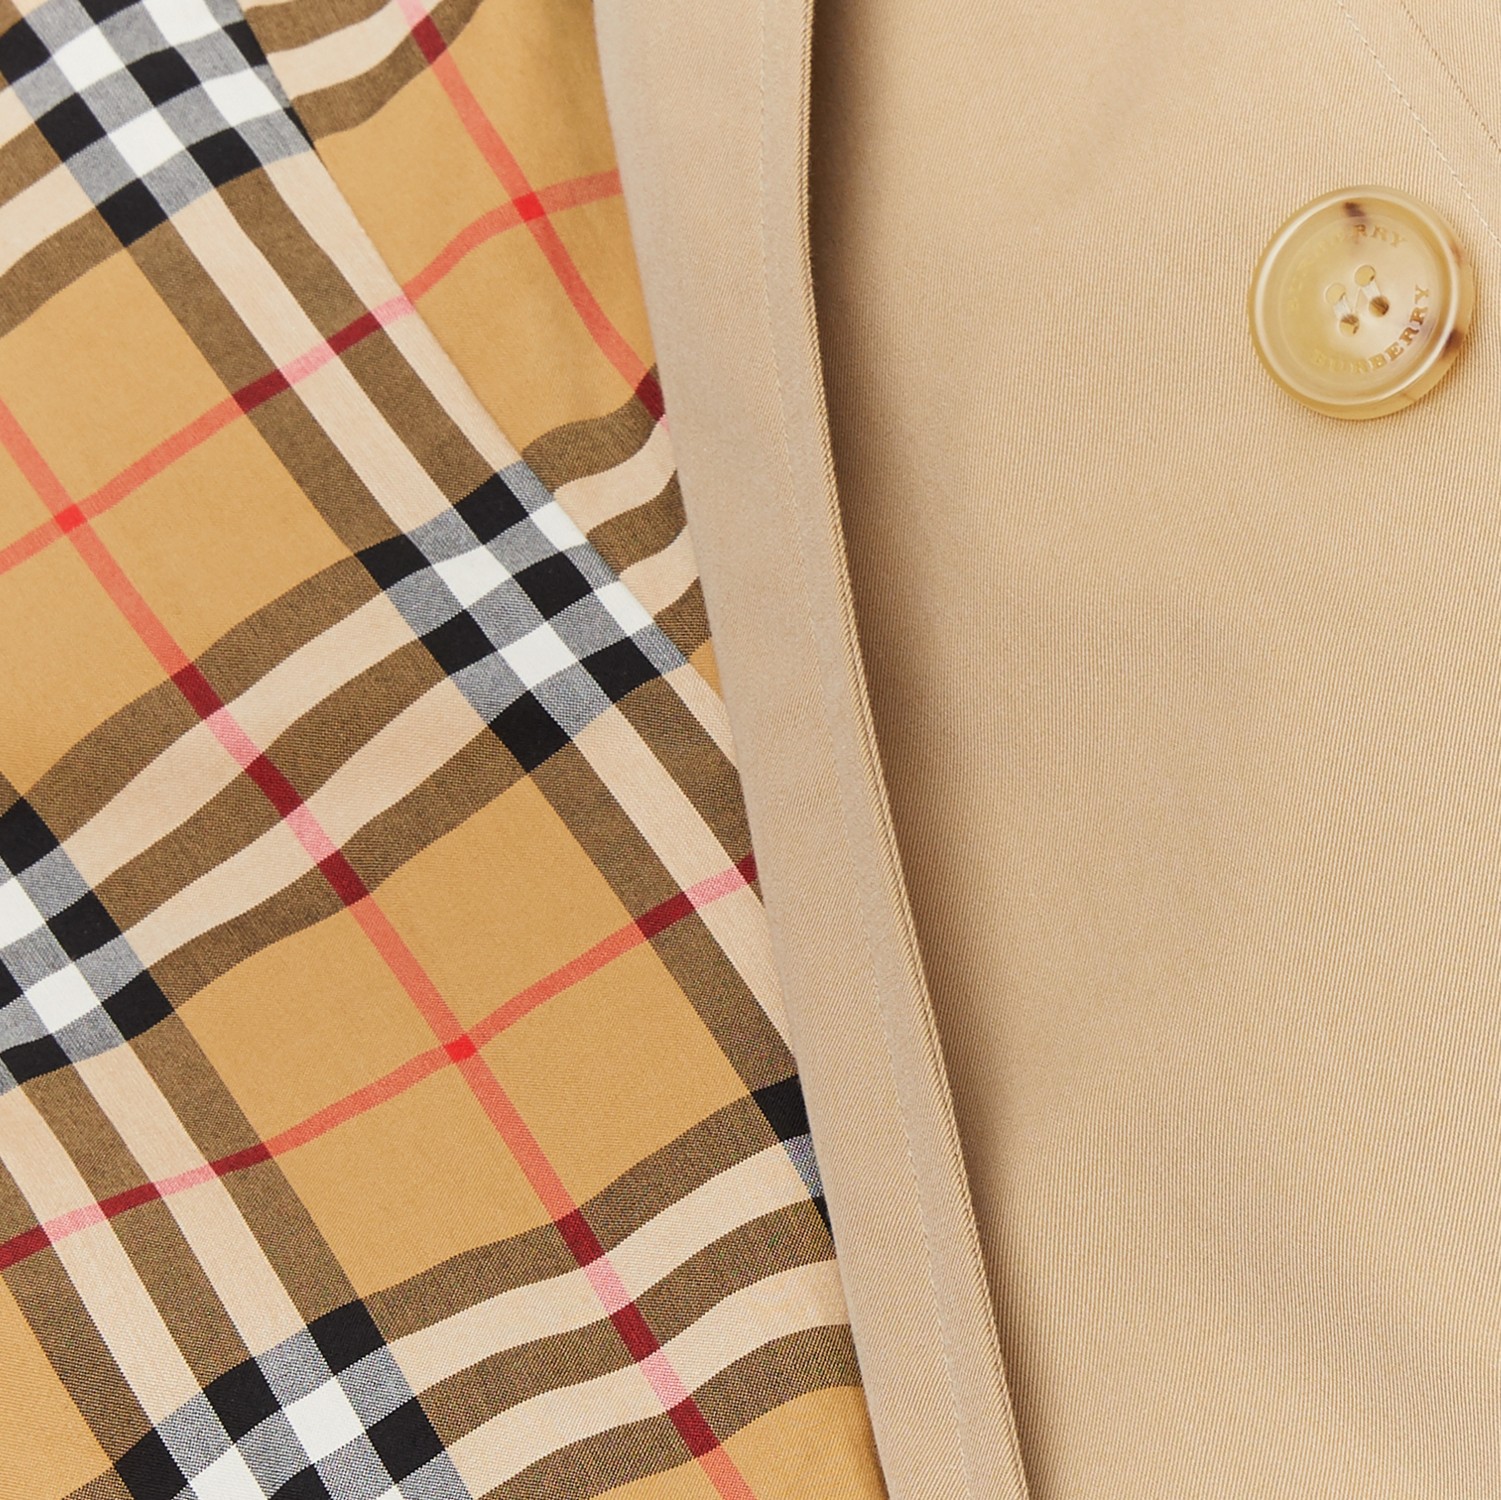 The Chelsea - Trench coat Heritage médio (Mel) - Mulheres | Burberry® oficial